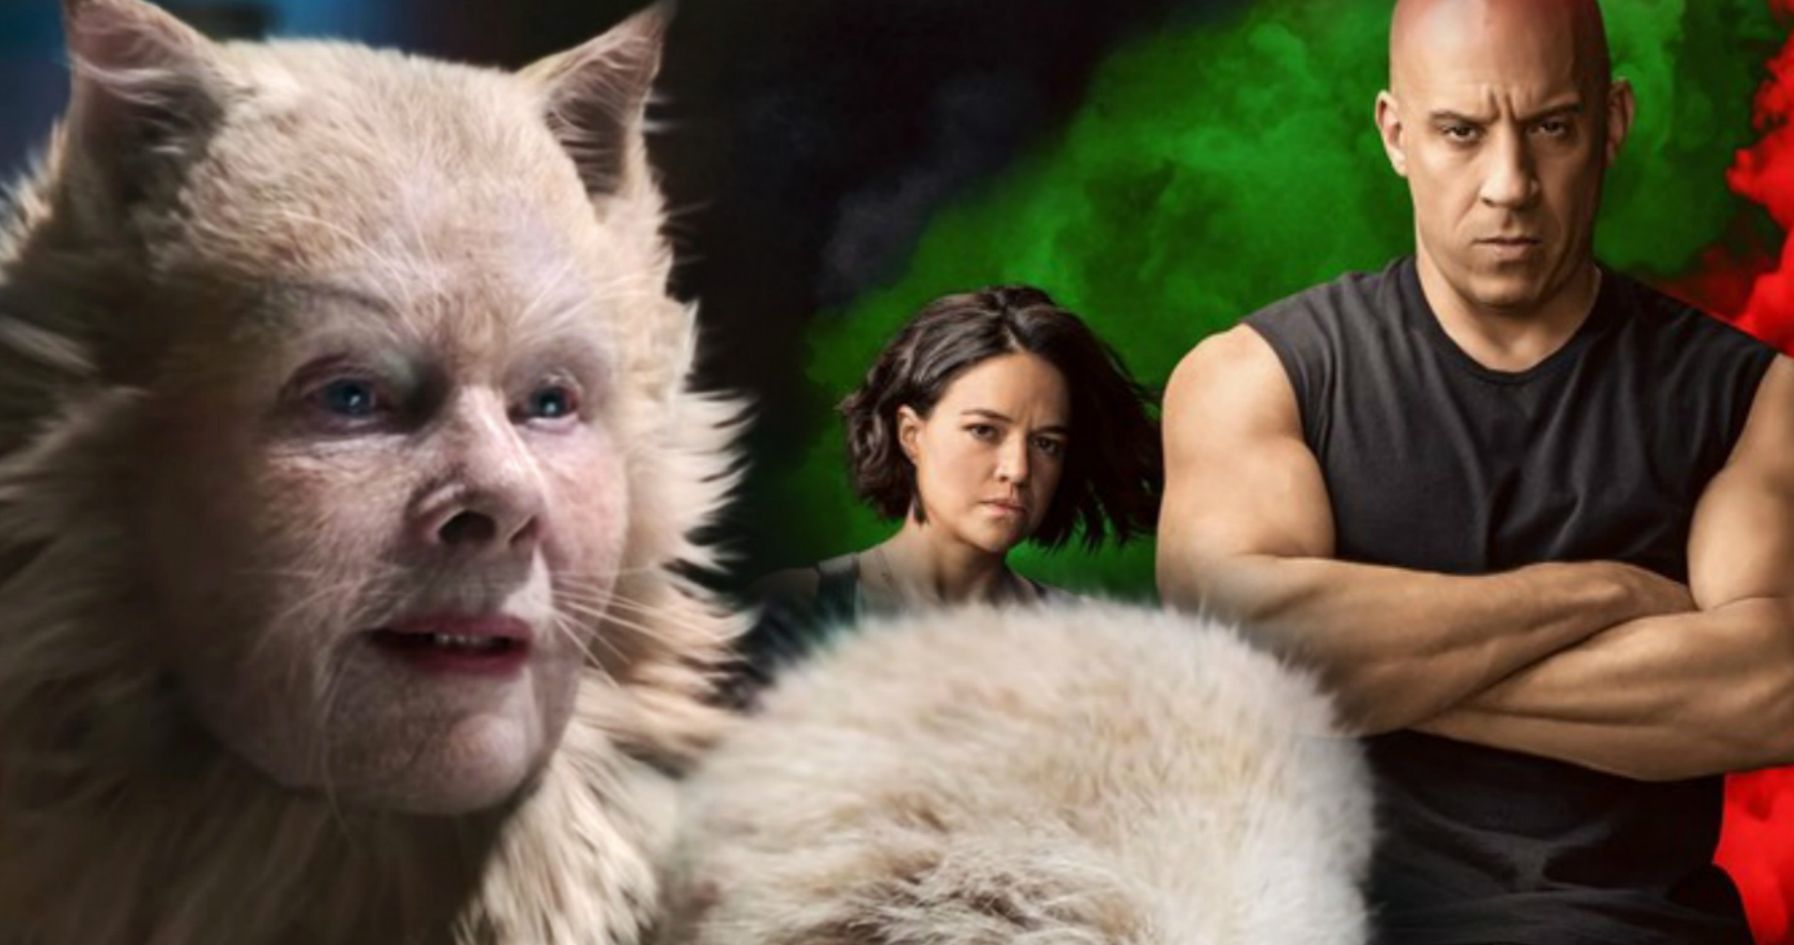 F9 Family Fan Casts Final Fast and Furious: Dame Judi Dench, She'd Be Awesome